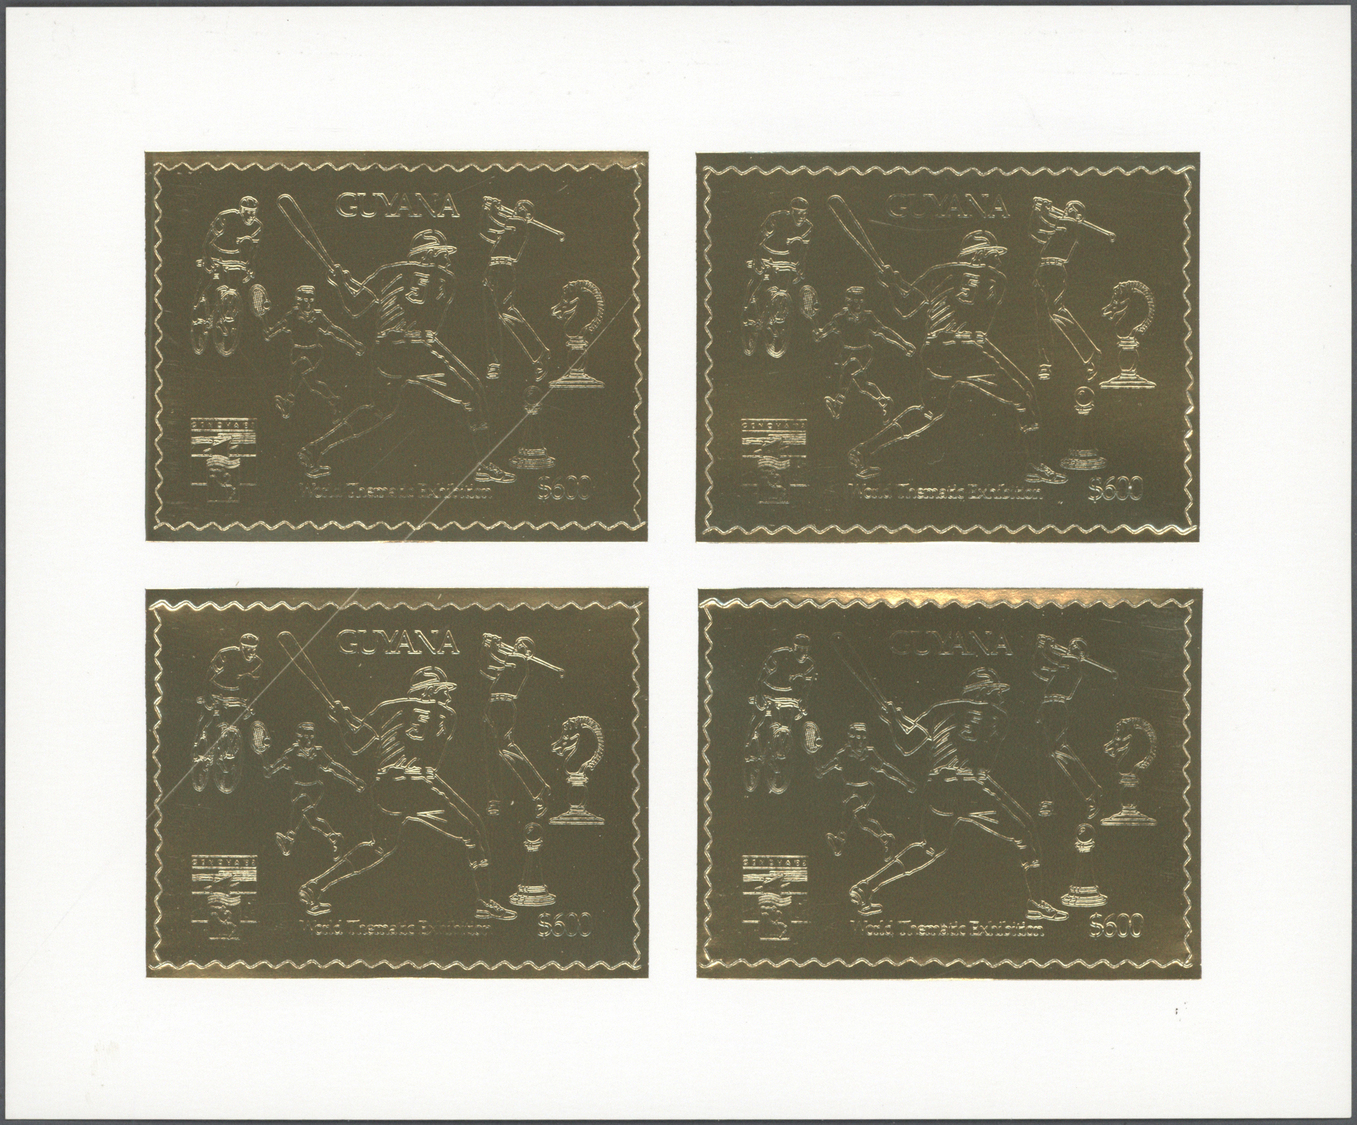 ** Guyana: 1992, International Stamp Exhibition GENOVA'92 Complete Set Of 18 GOLD And SILVER Thematic Stamps In Sheetlet - Guyana (1966-...)